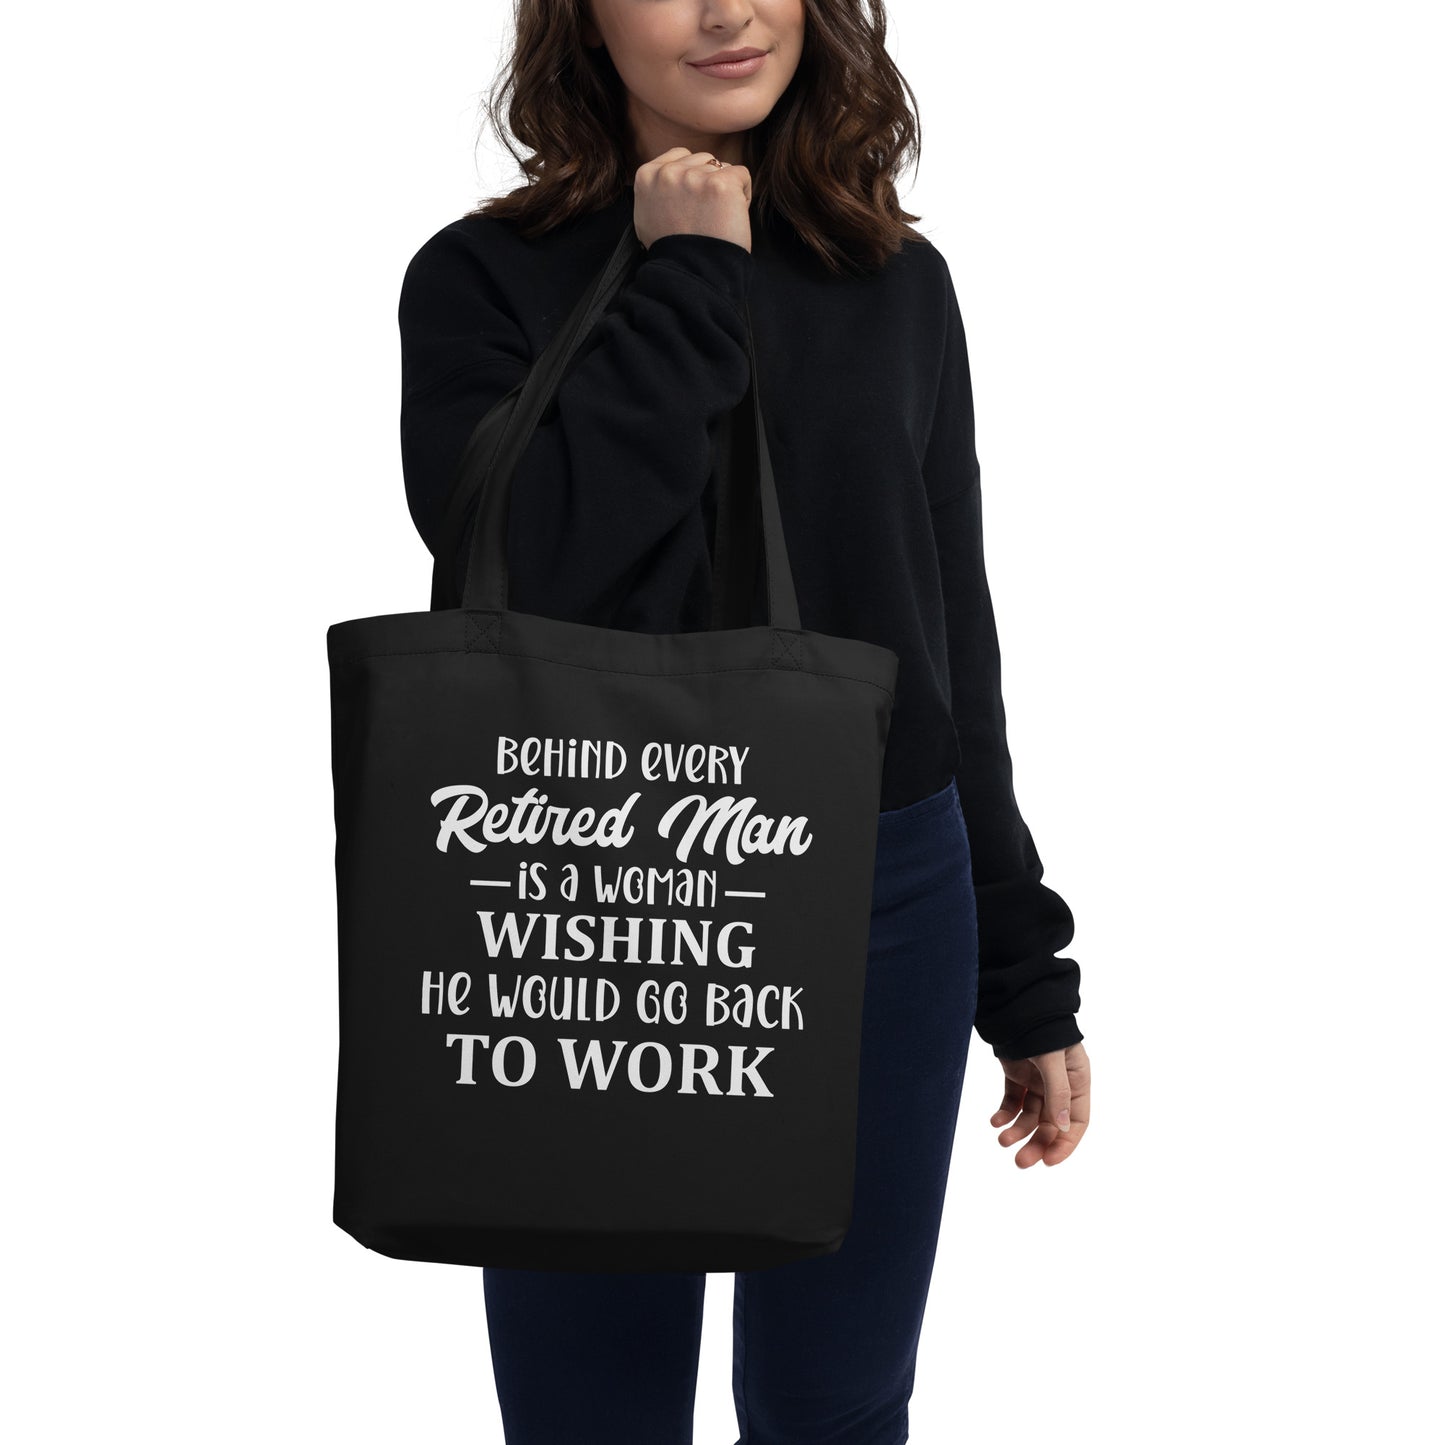 Behind Every Retired Man Eco Tote Bag